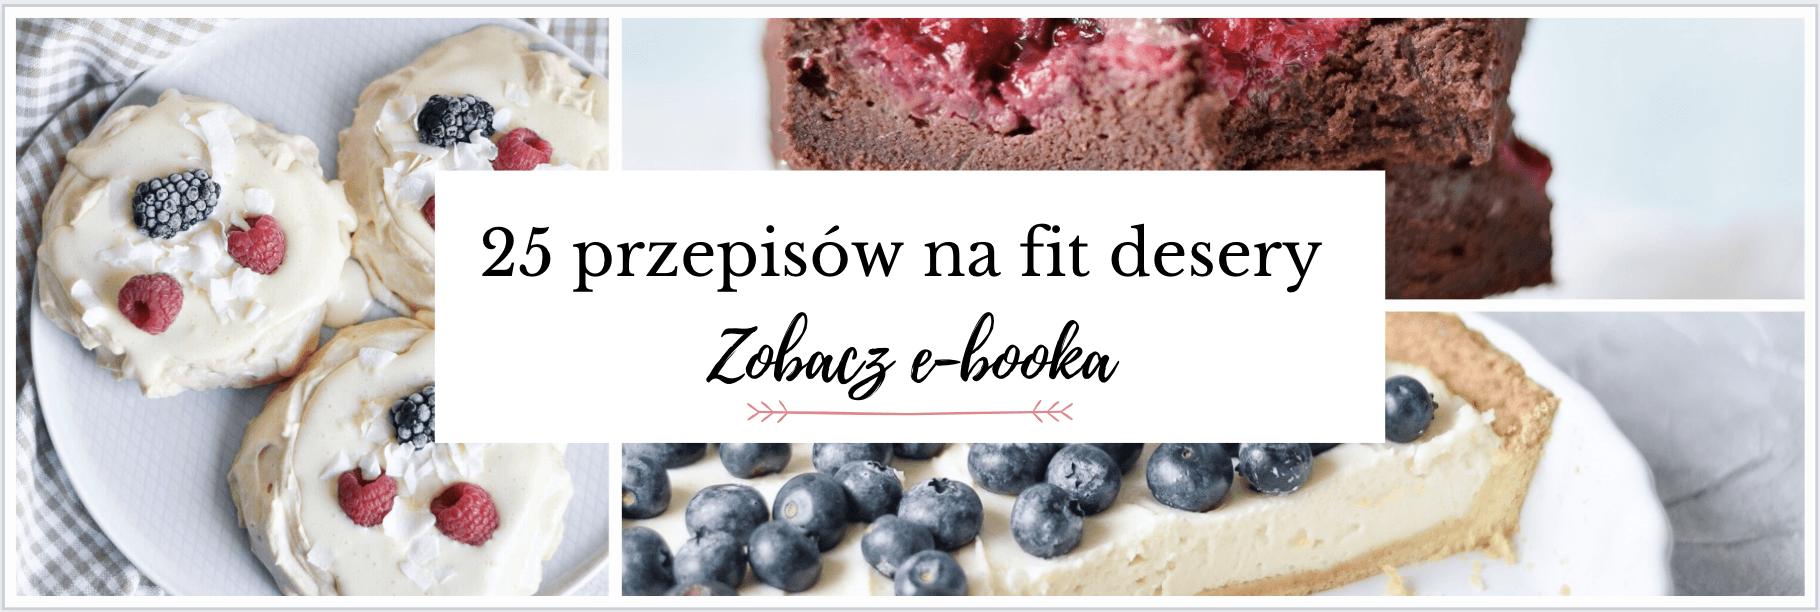 25-przepisow-na-fit-desery-ebook-baner